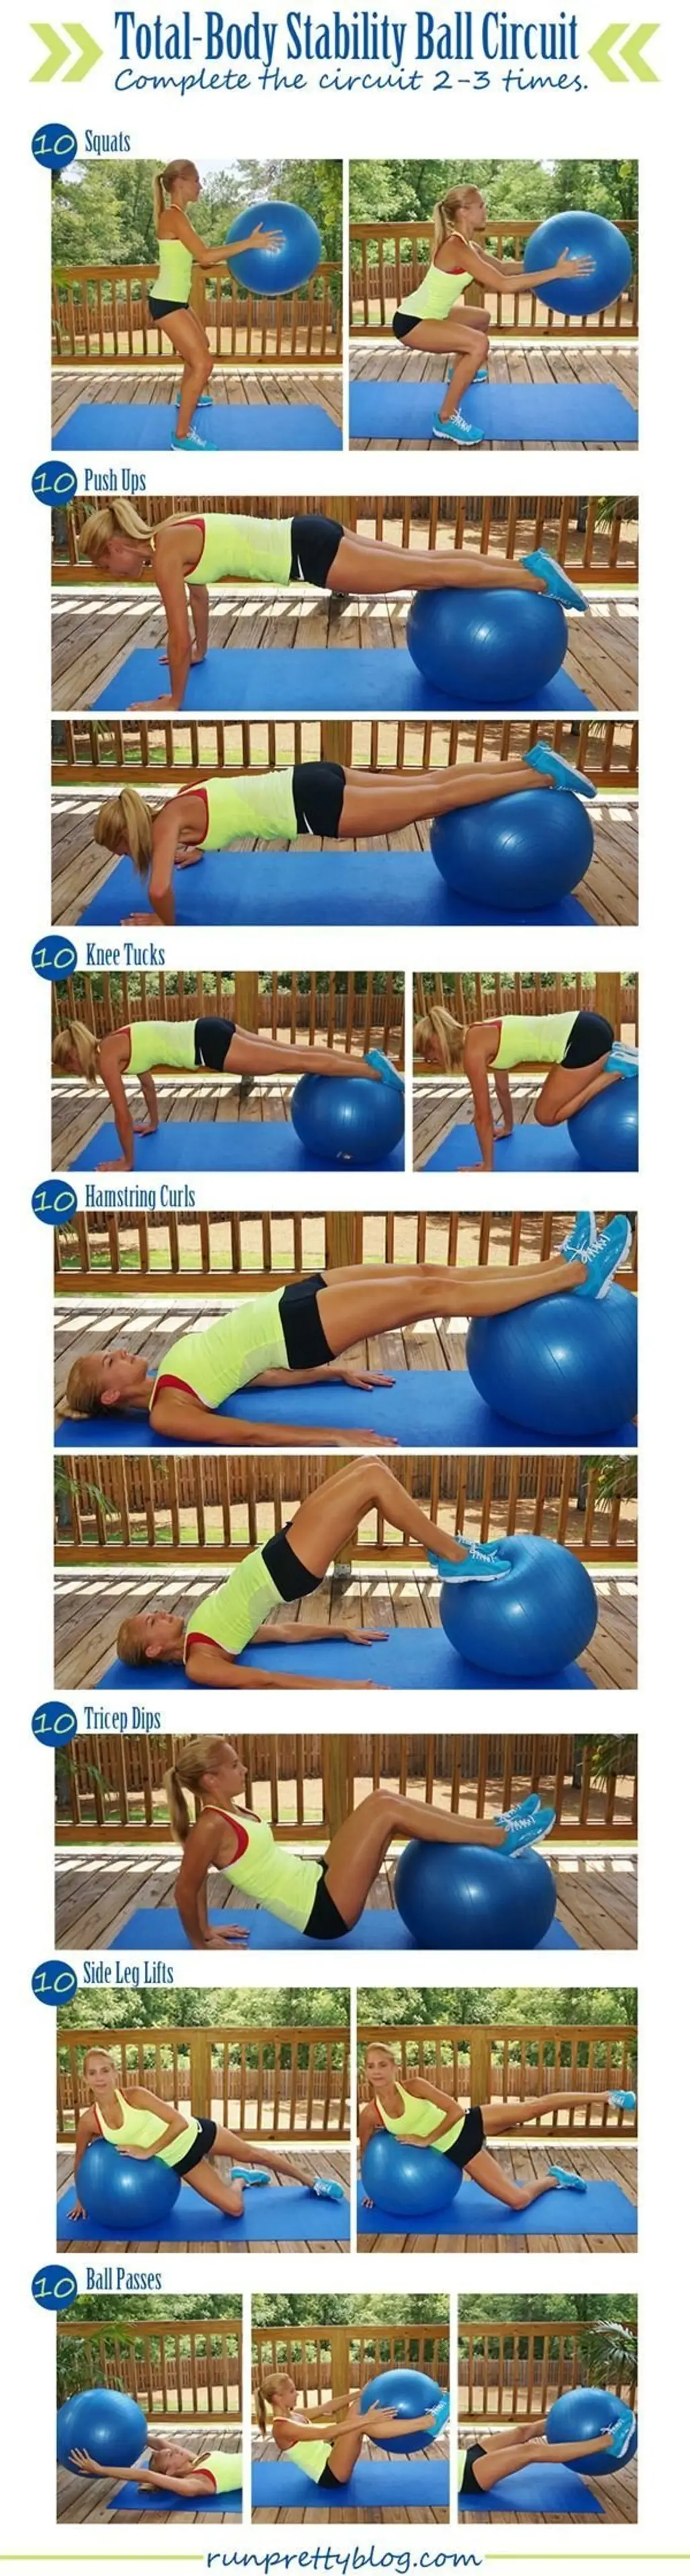 Stability Ball Total-Body Workout